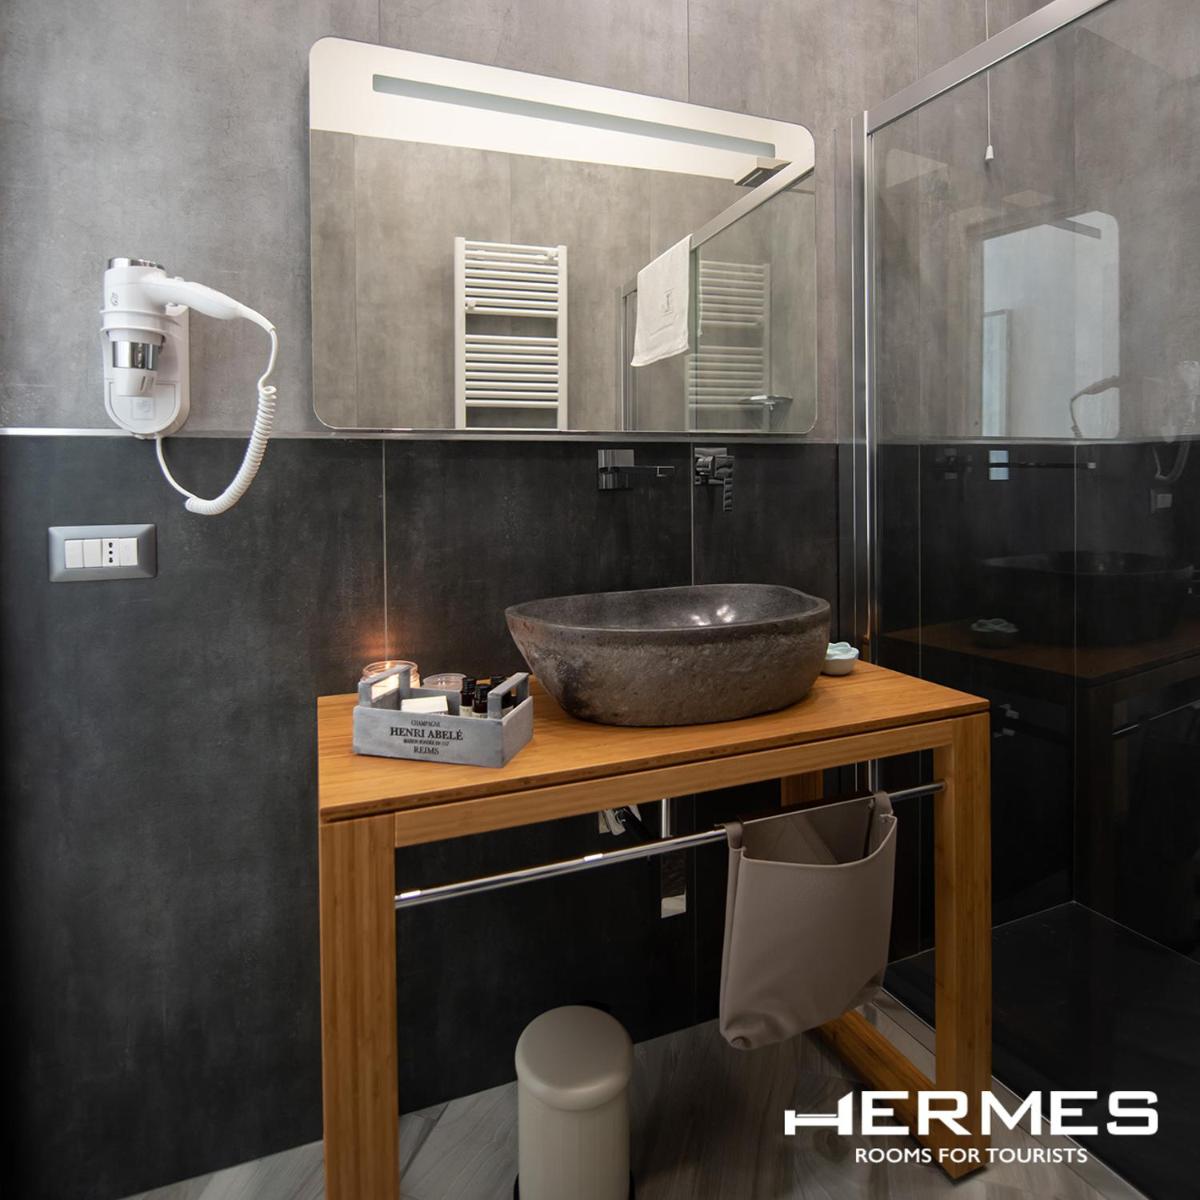 Foto - Hermes rooms for tourists